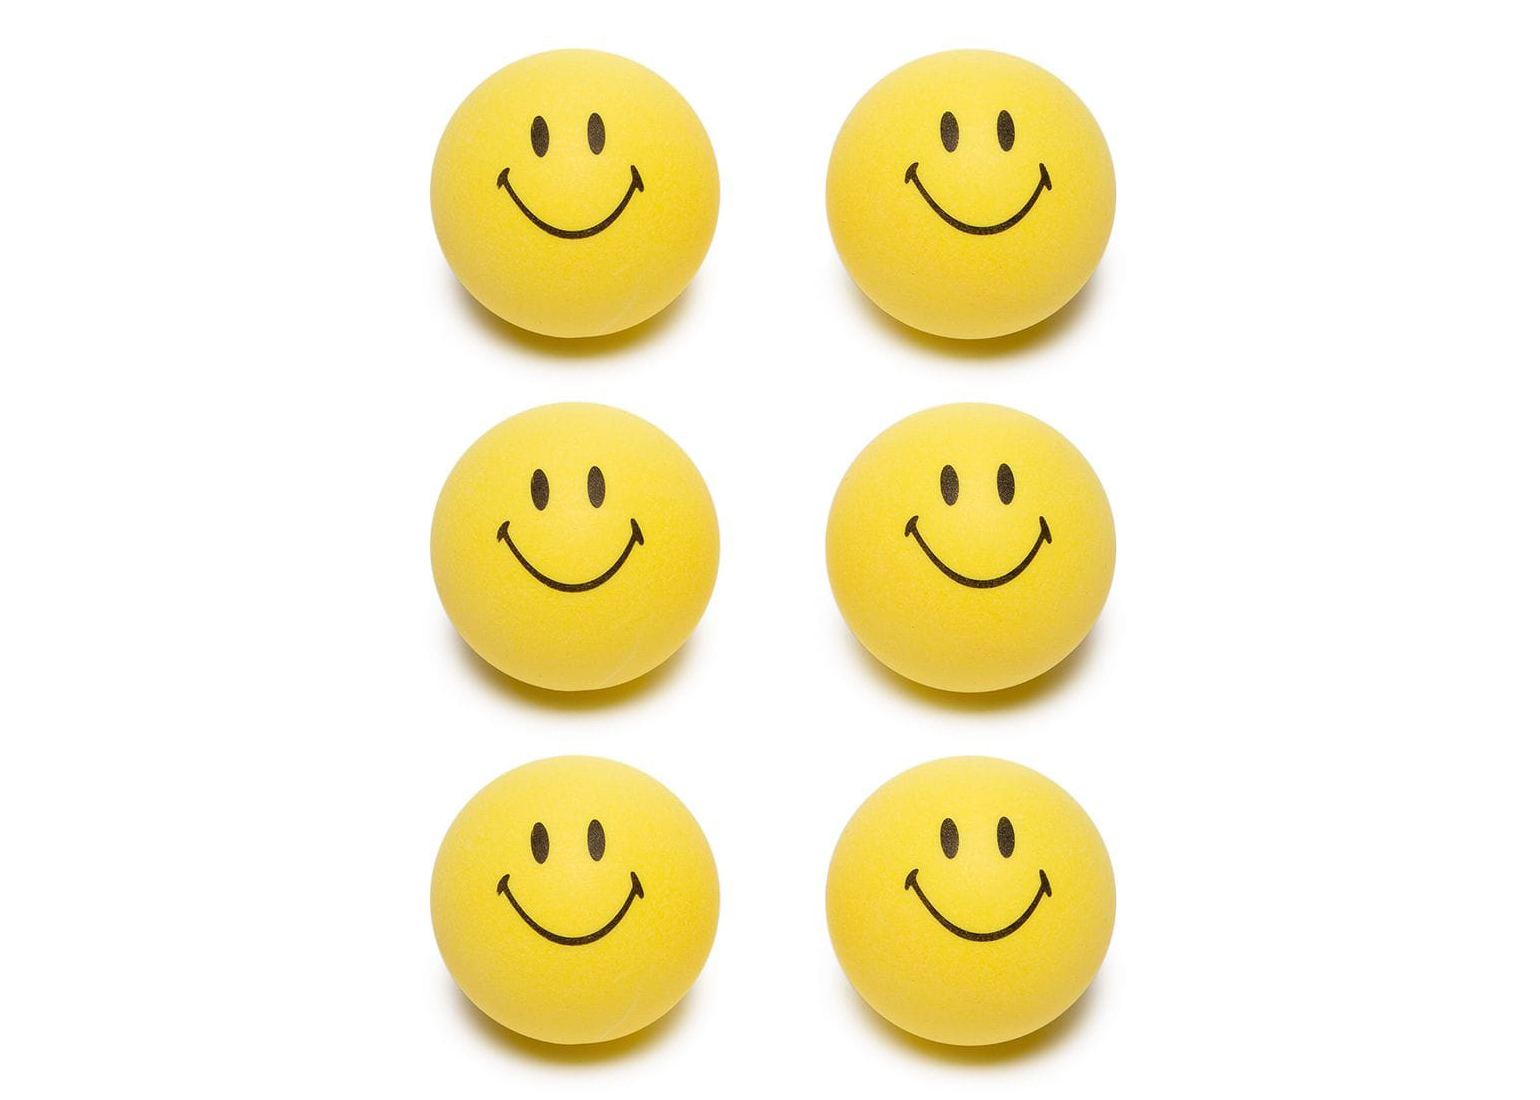 Smiley Smile Dead Happy Black Yellow Face Table Tennis Ping Pong Ball 3 Pack 